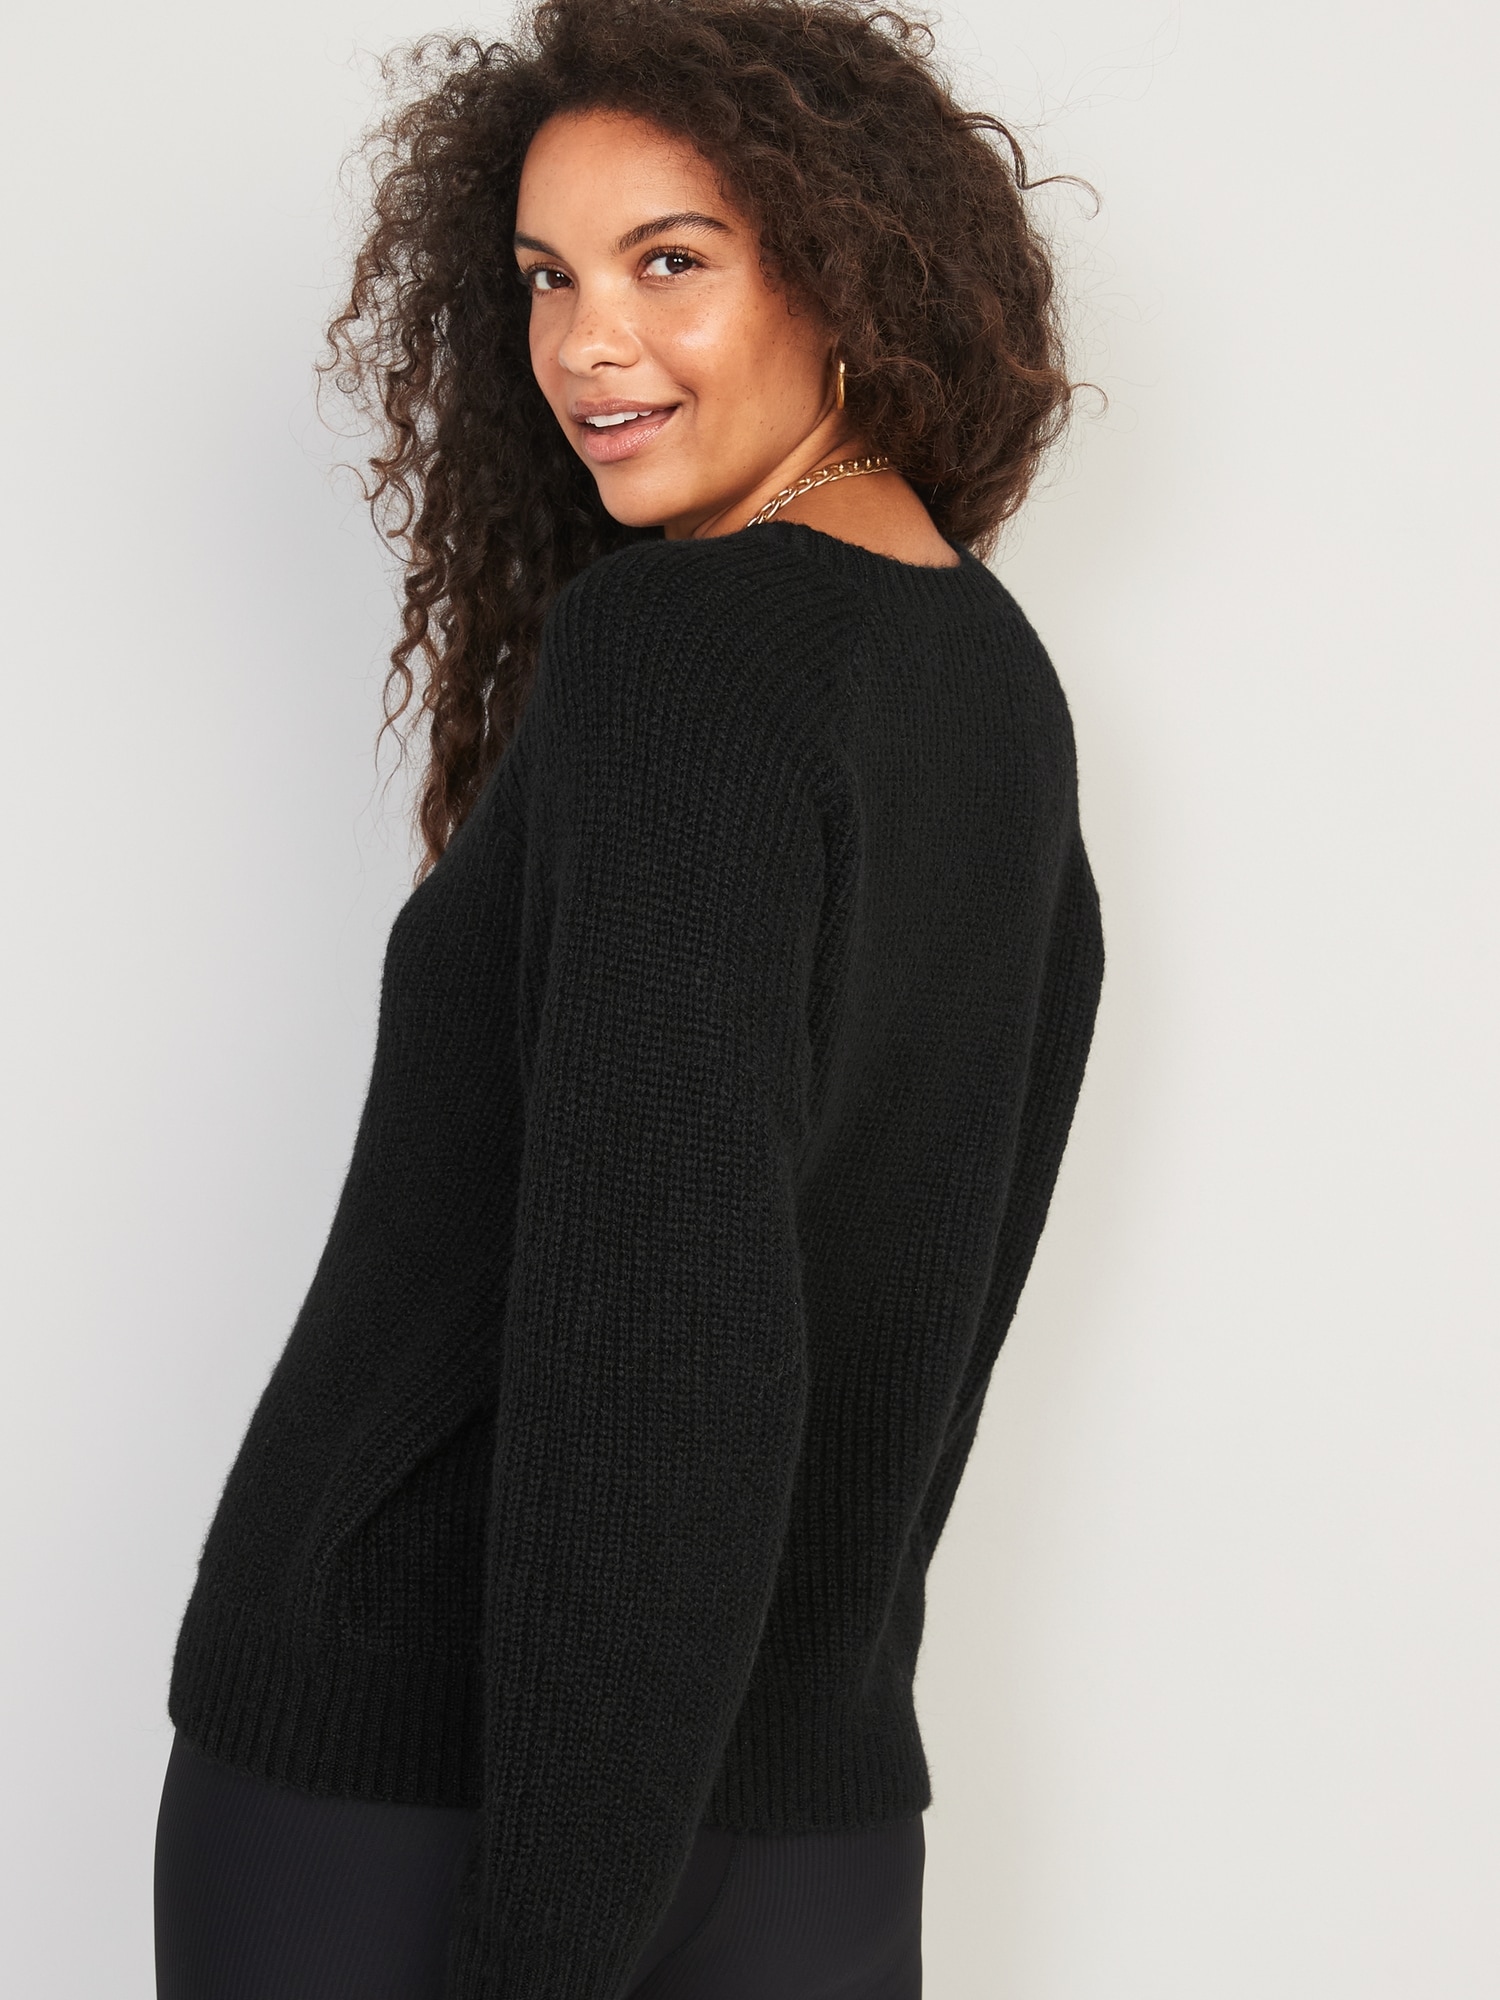 Heathered Cozy Shaker-Stitch Pullover Sweater for Women